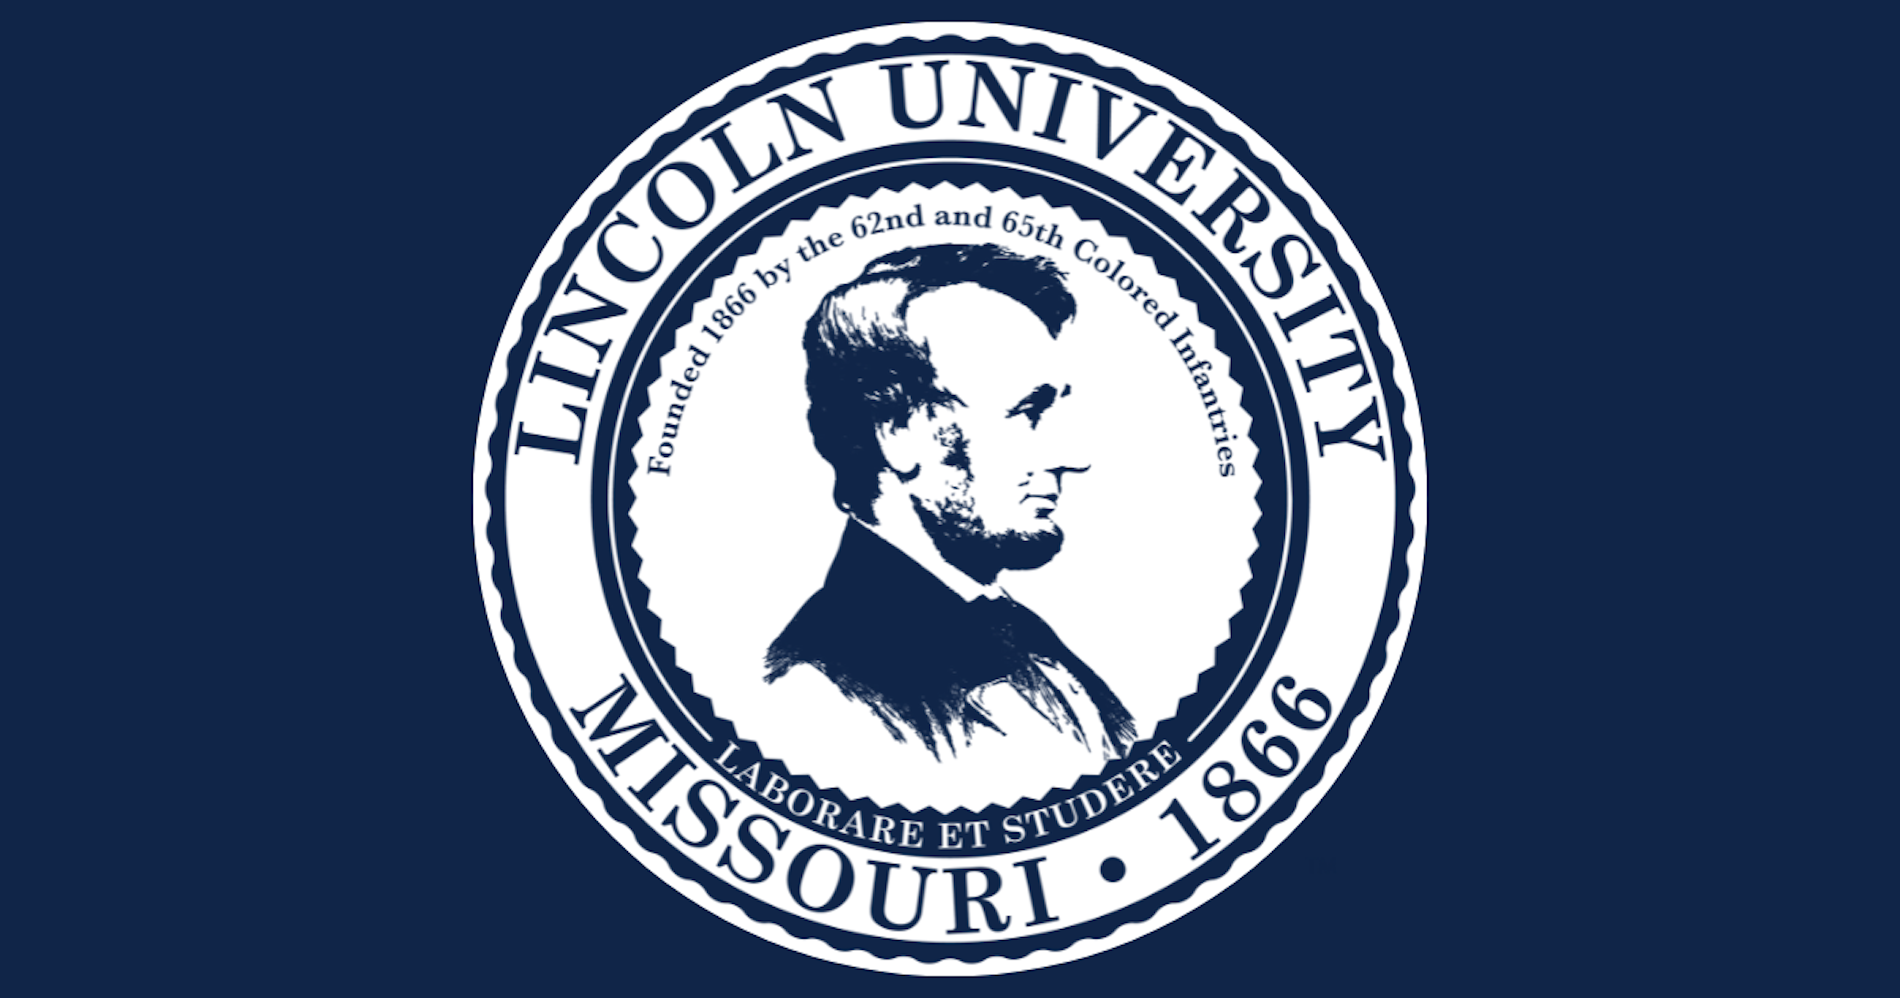 Lincoln University's seal is the motto in Latin "To Labor and Study”